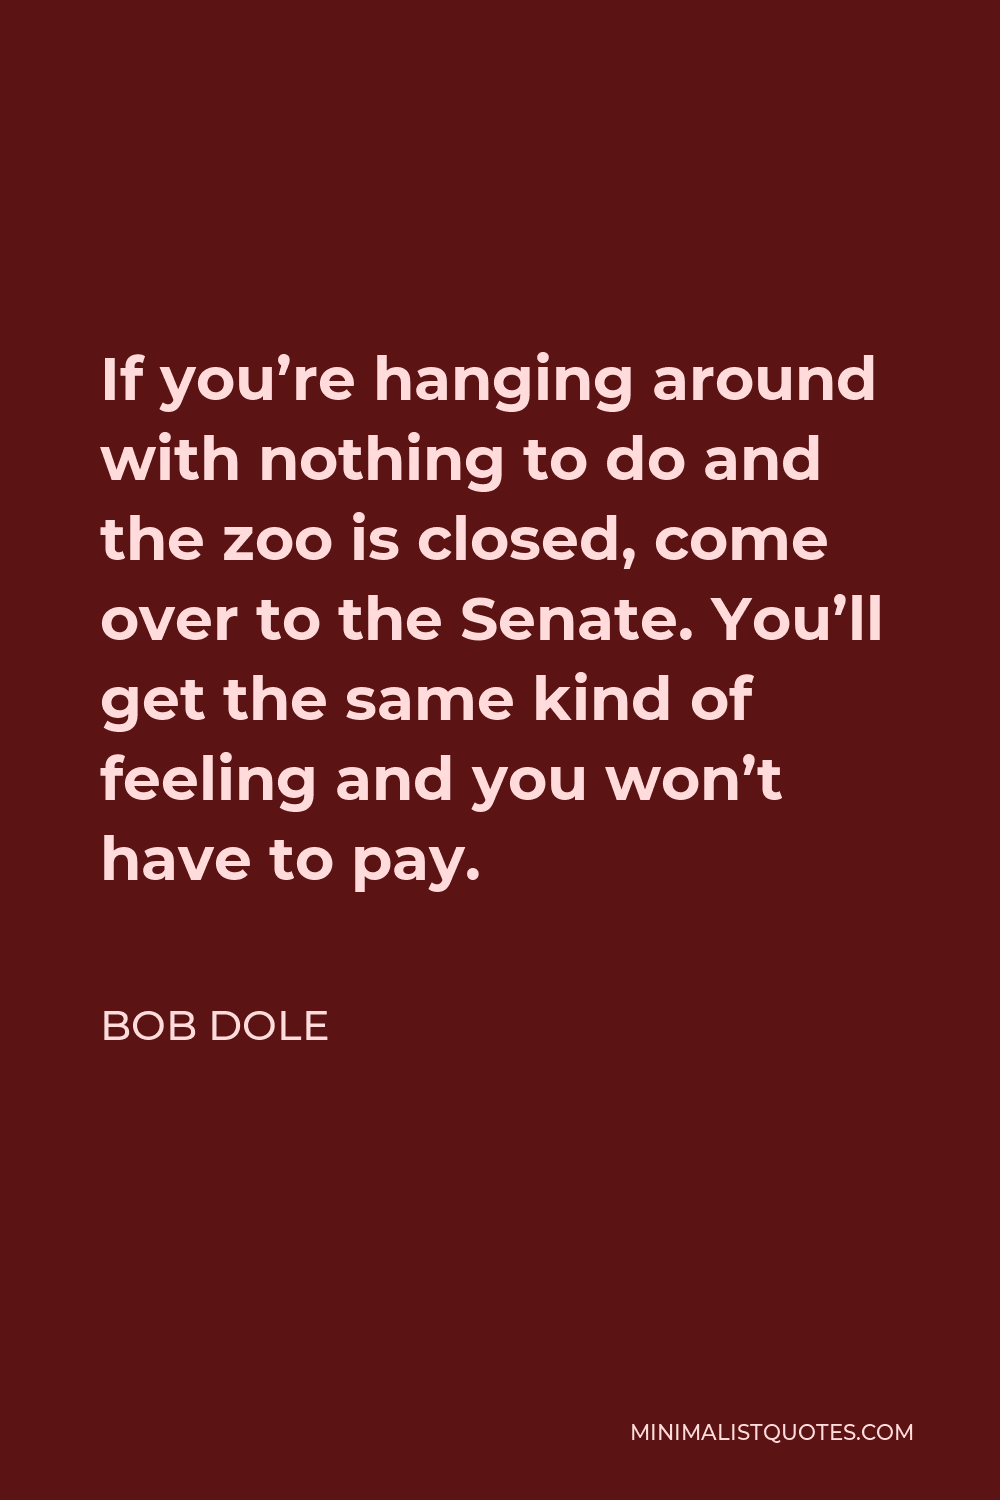 Bob Dole Quote - If you’re hanging around with nothing to do and the zoo is closed, come over to the Senate. You’ll get the same kind of feeling and you won’t have to pay.